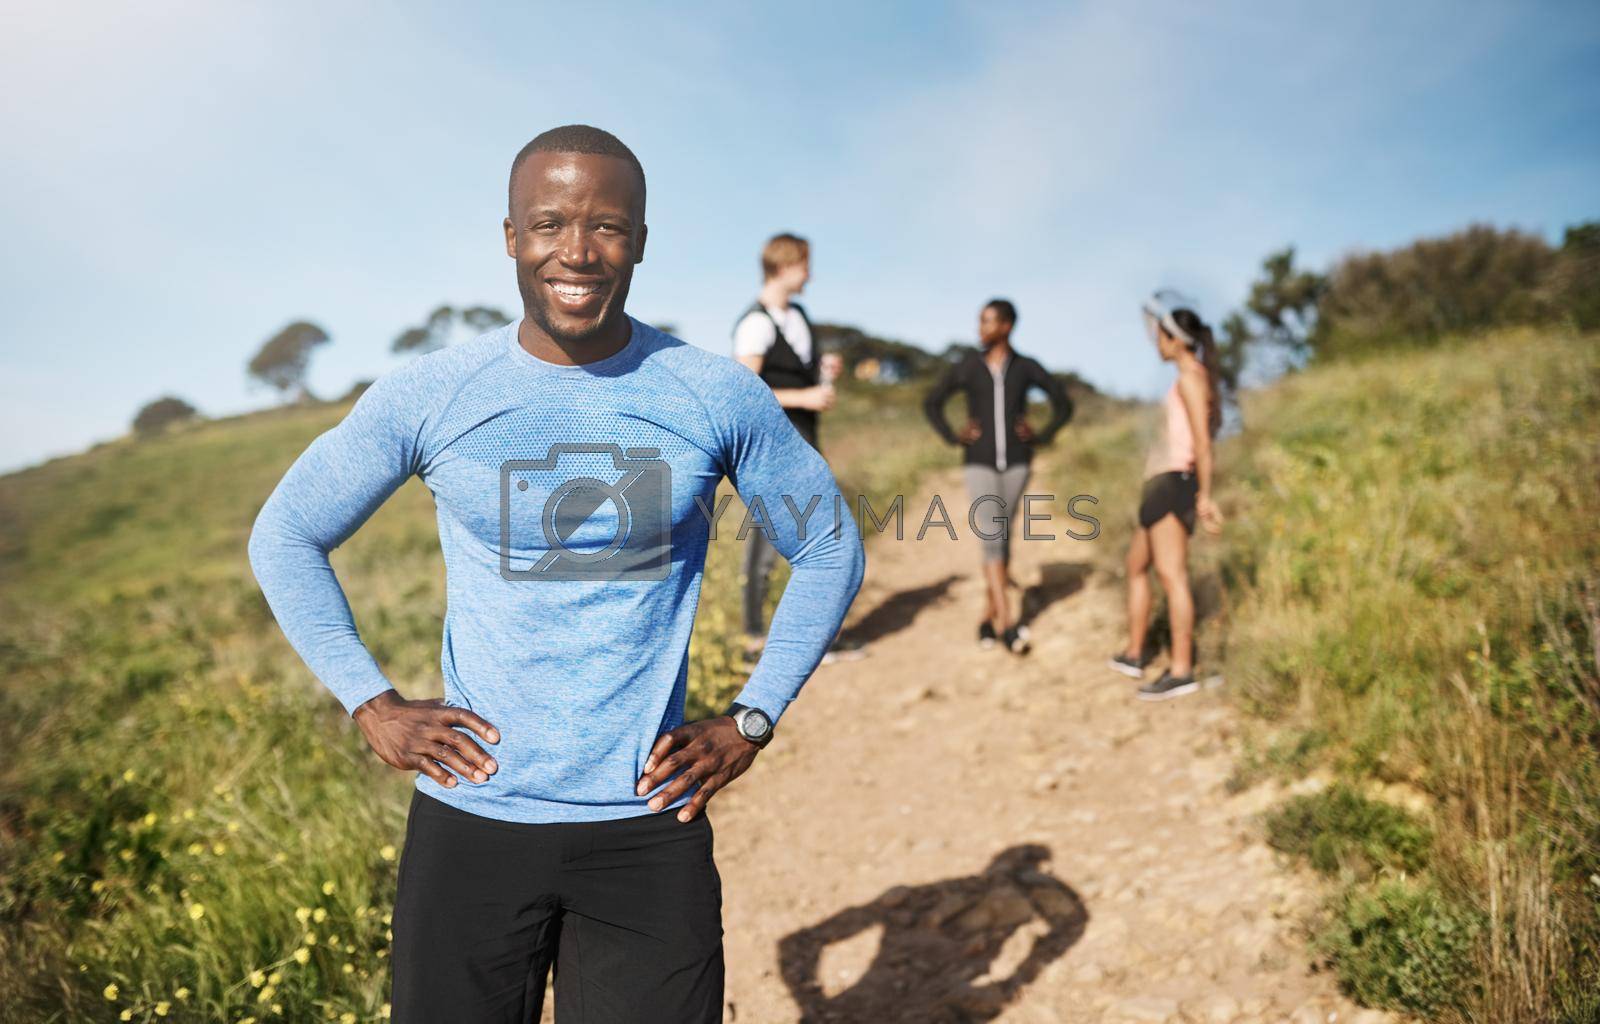 Portrait of a young man exercising outside with people in the background.